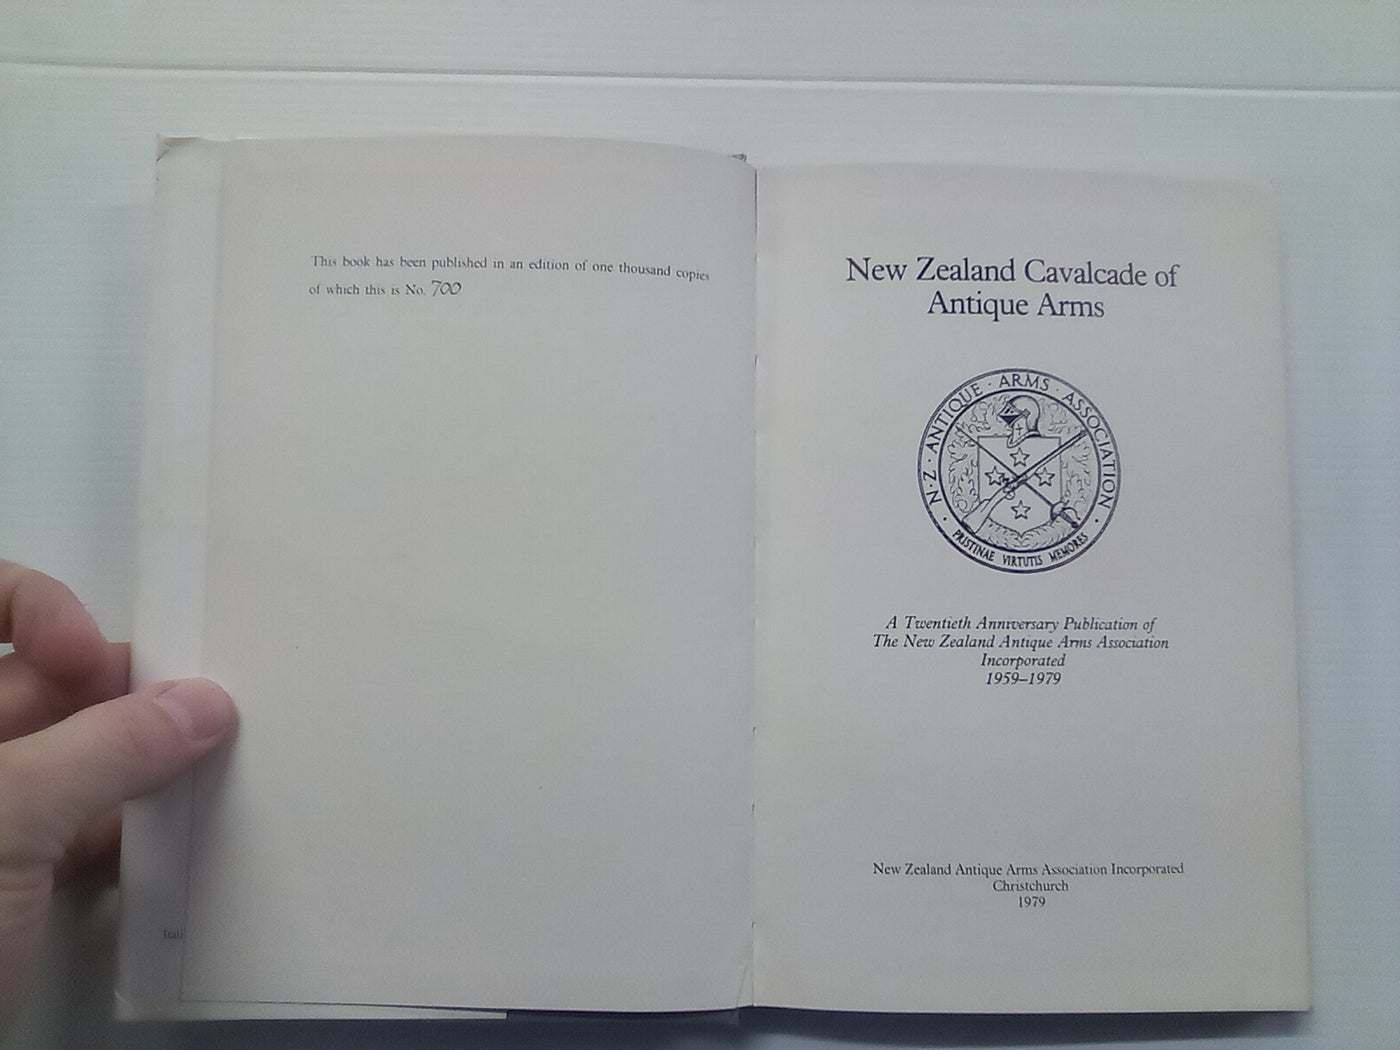 NZ Cavalcade of Antique Firearms (1979) by NZ Antique Arms Assoc.